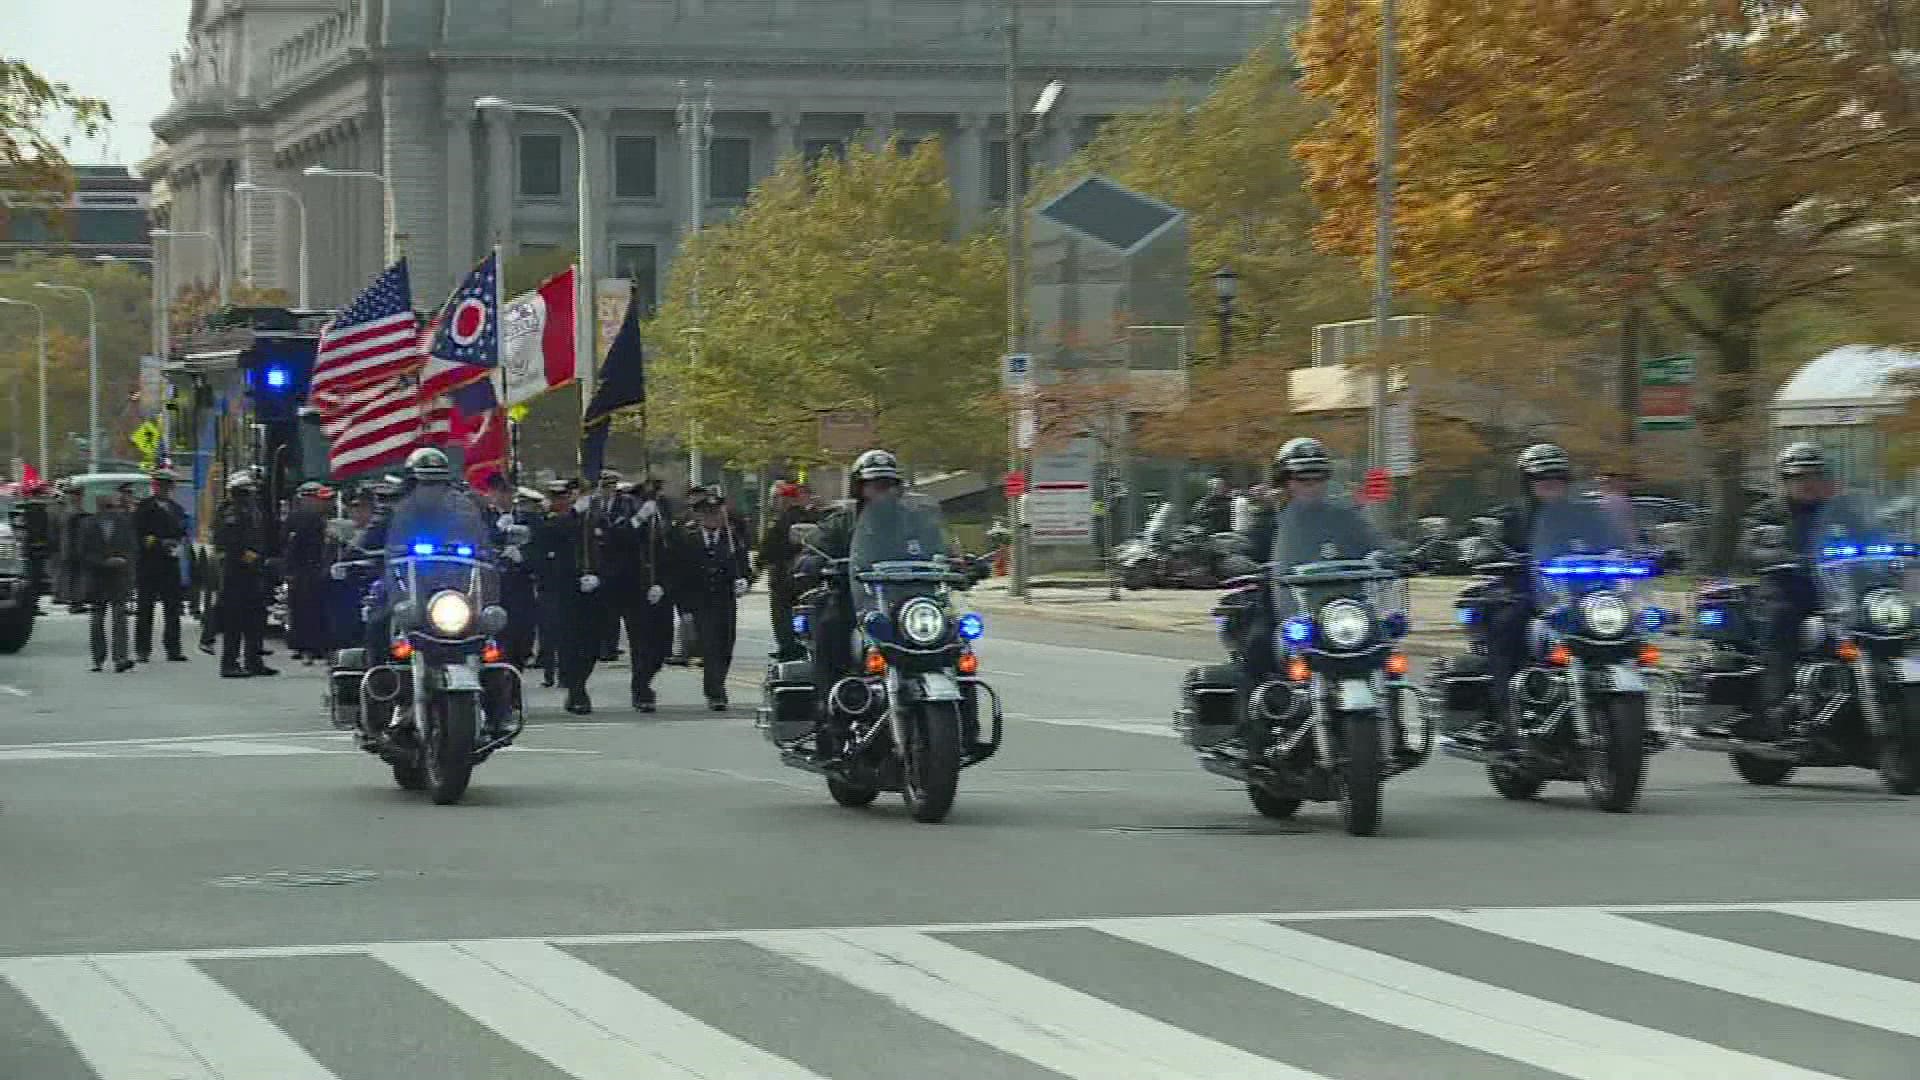 The 11th annual parade is marching through the streets of downtown Cleveland this afternoon.